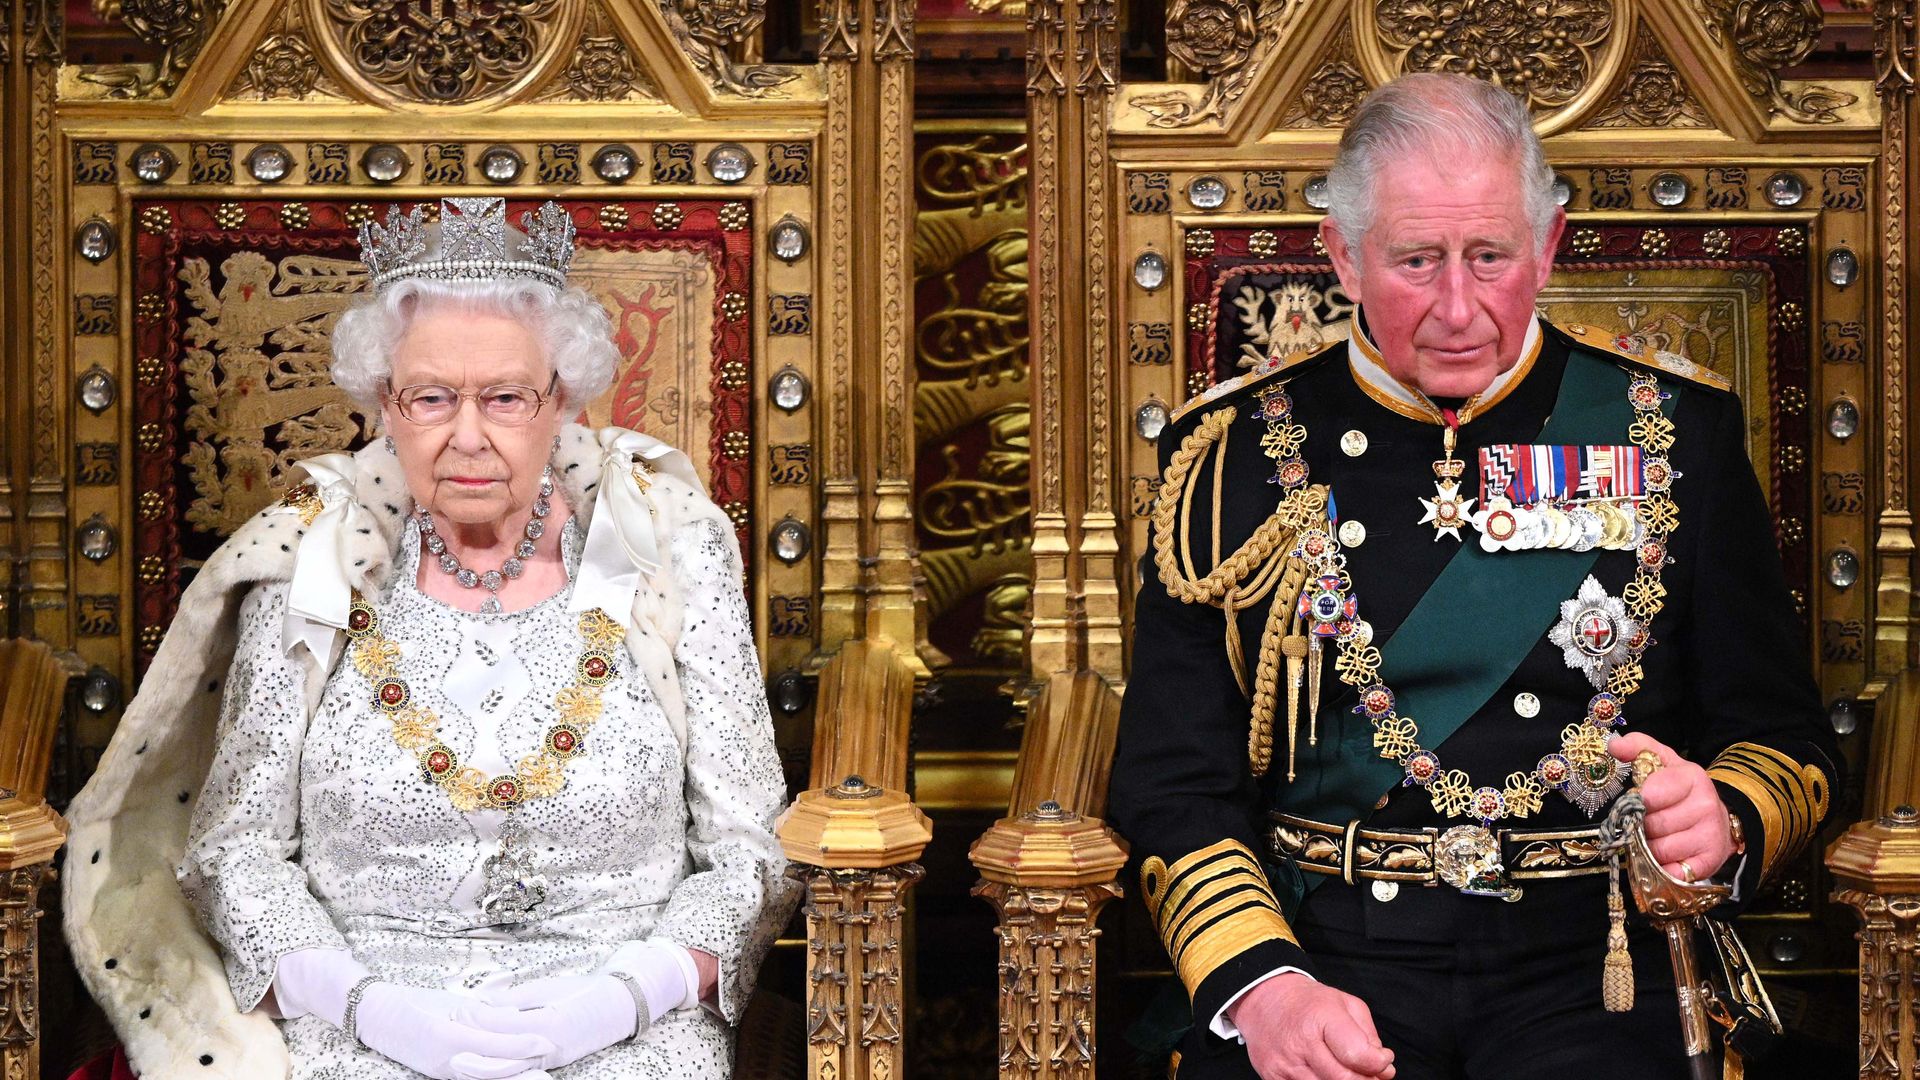 the queen king charles sat on thrones State Opening of Parliament 